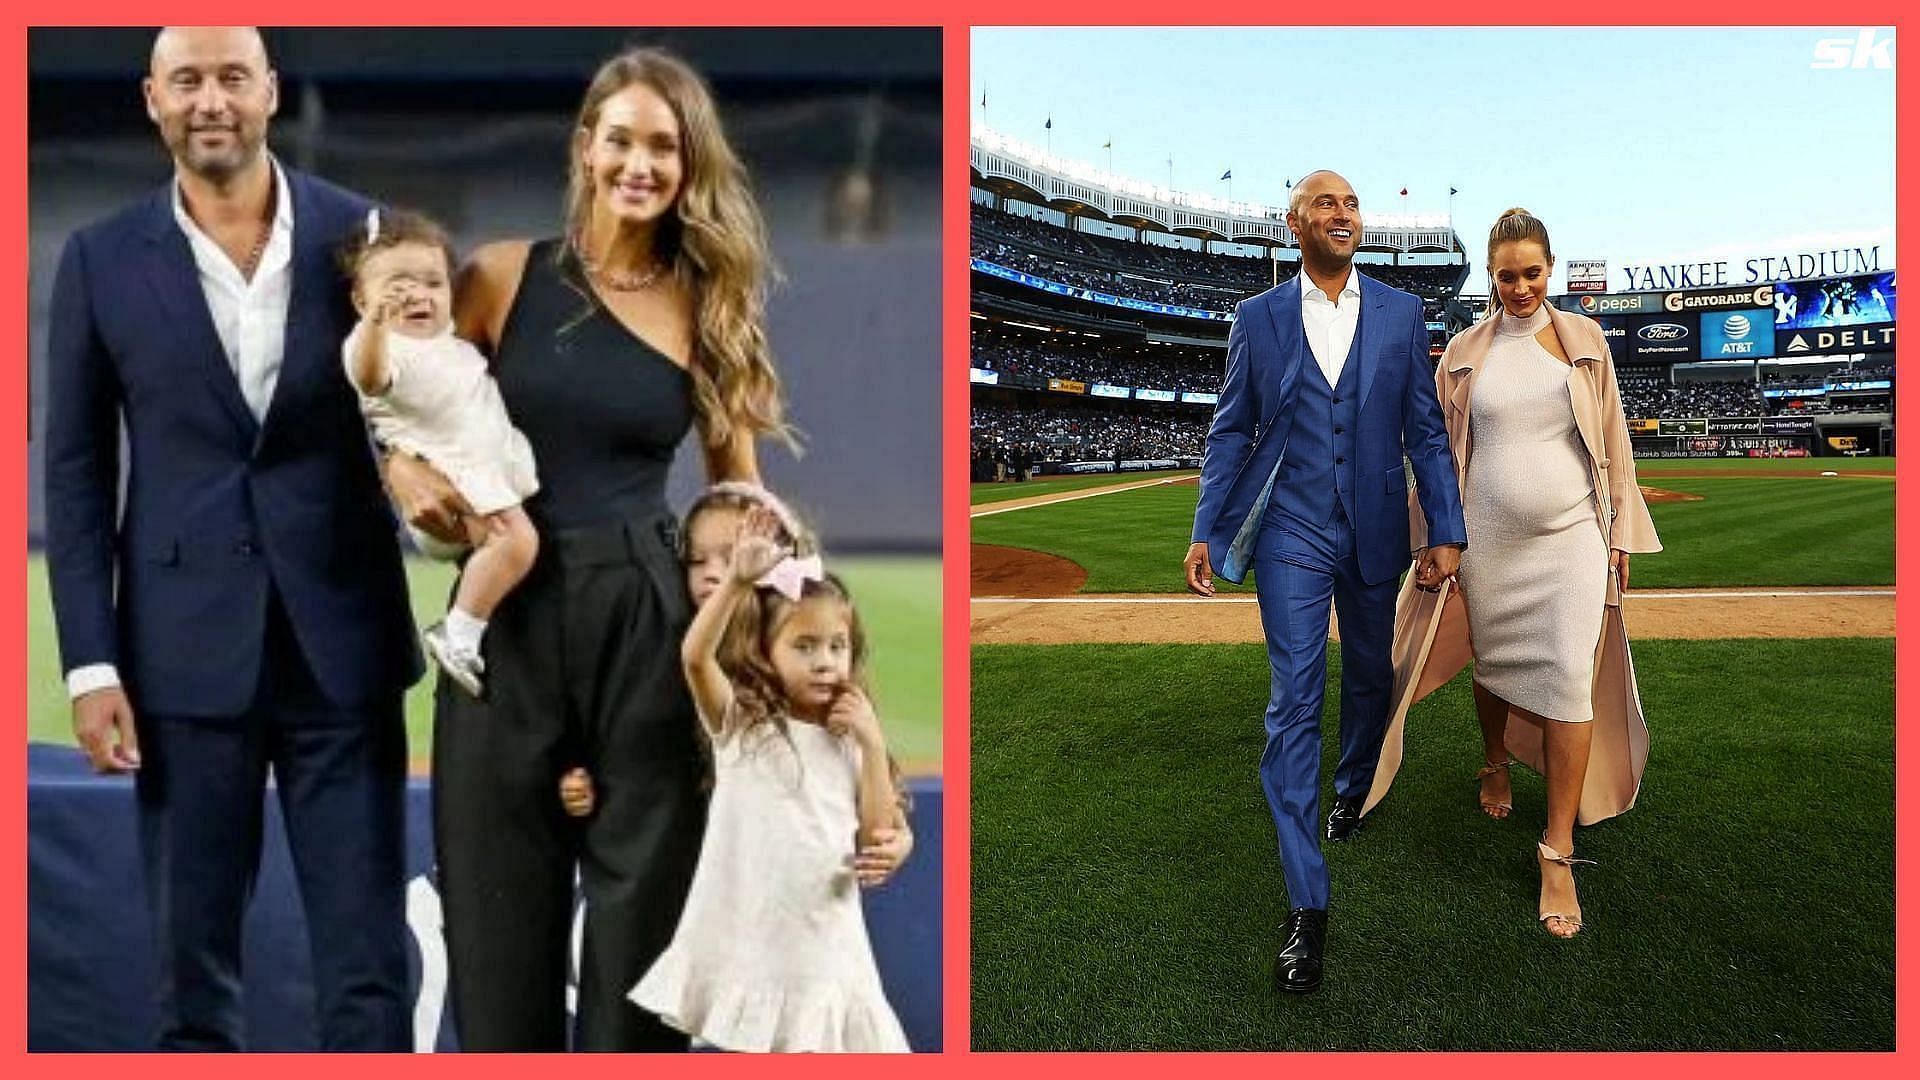 Hannah Tells Why Her Relationship With Derek Jeter Worked